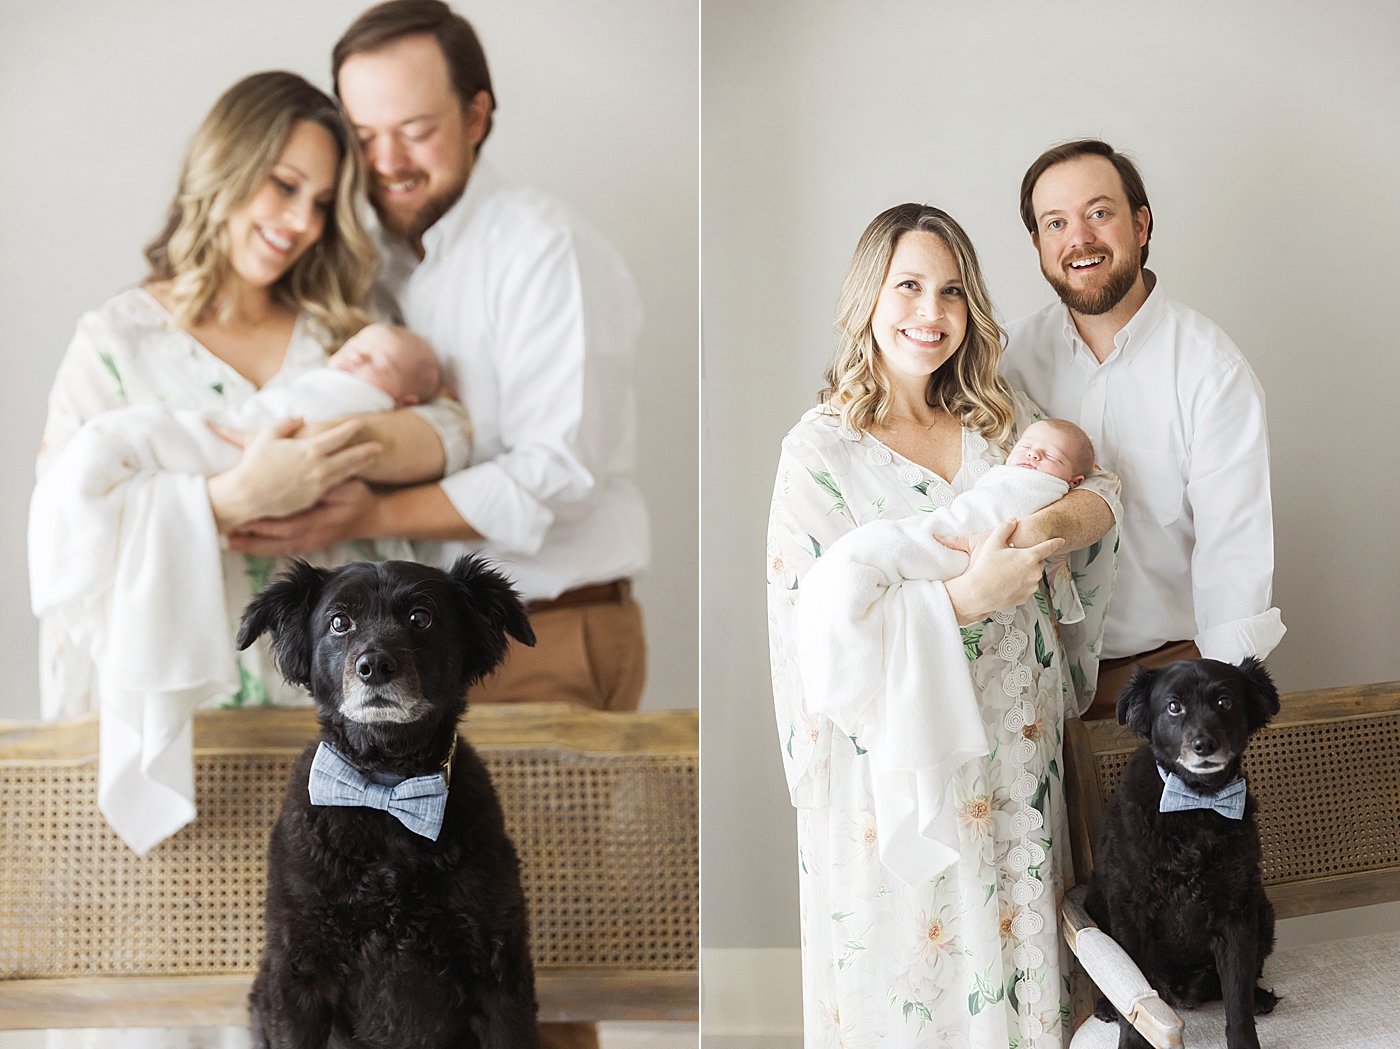 Family including fur baby in newborn session. Photo by Fresh Light Photography.